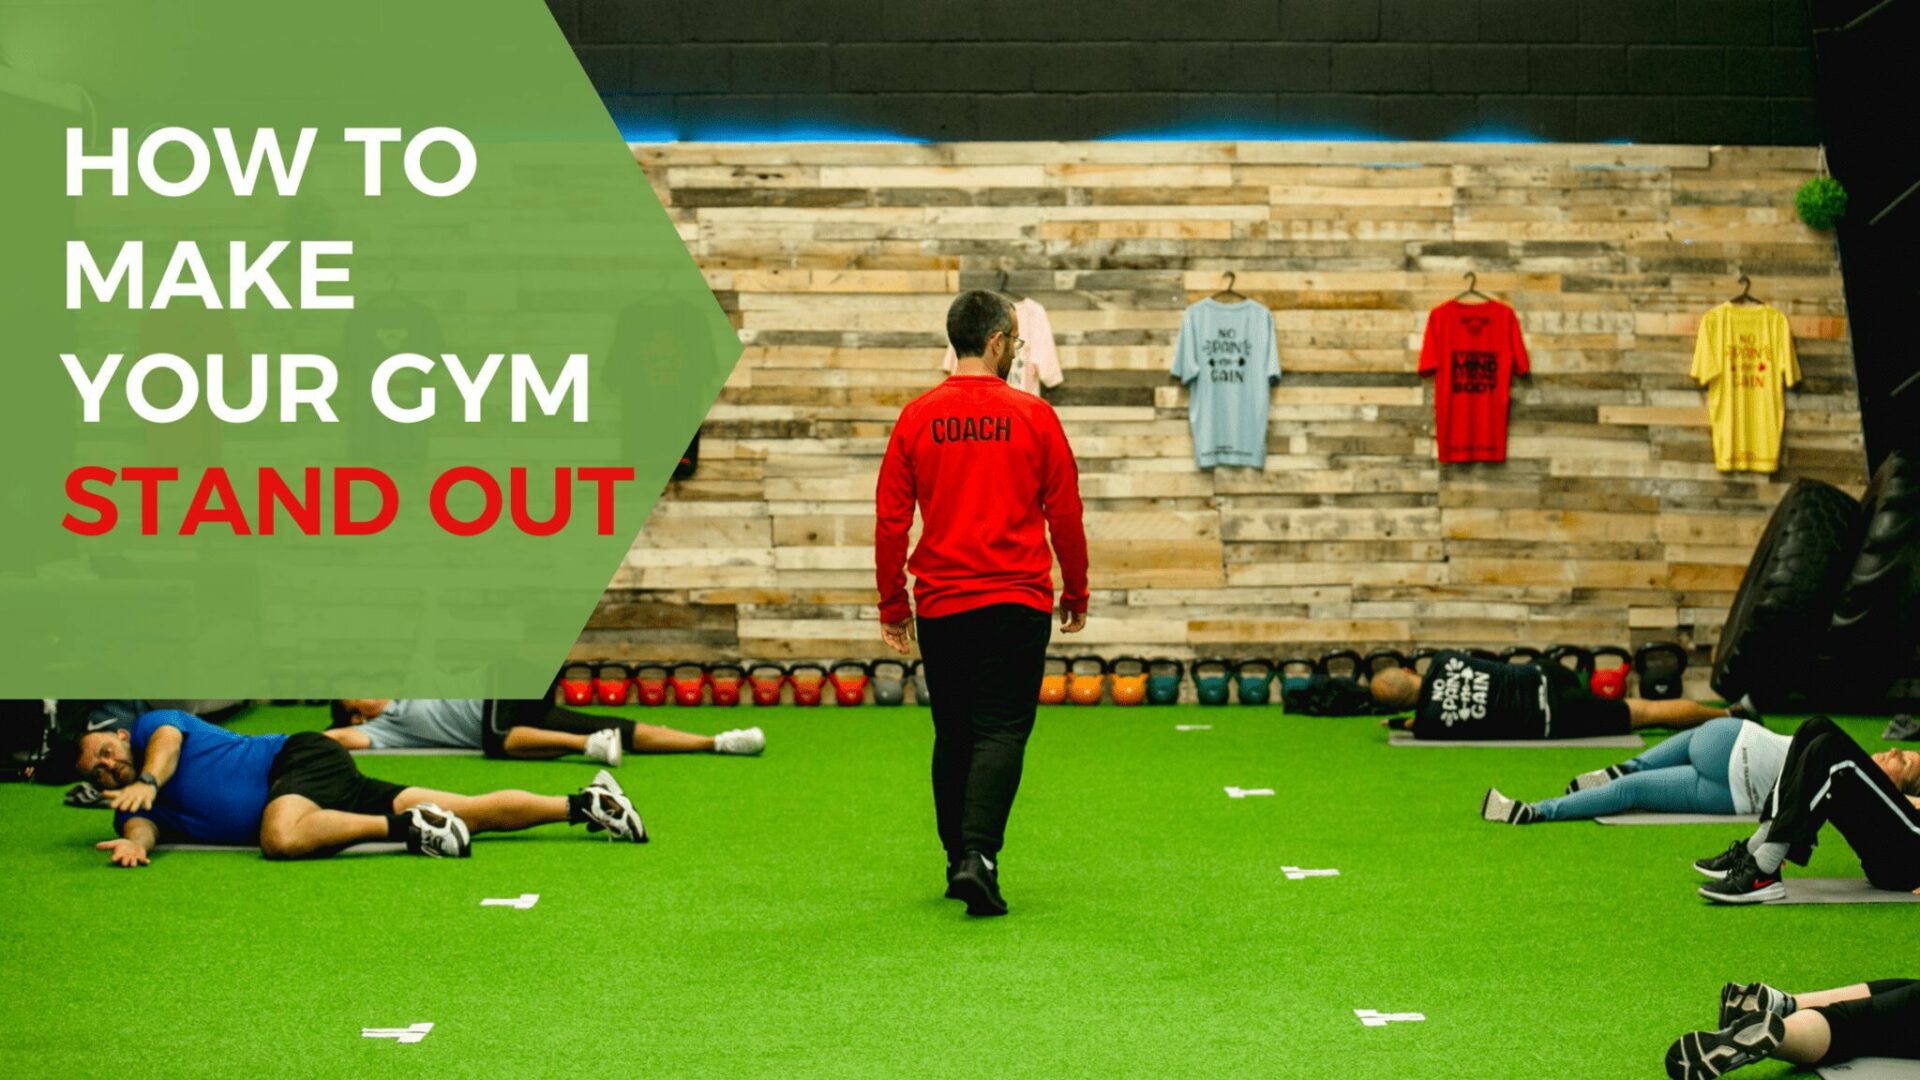 How to make your gym stand out